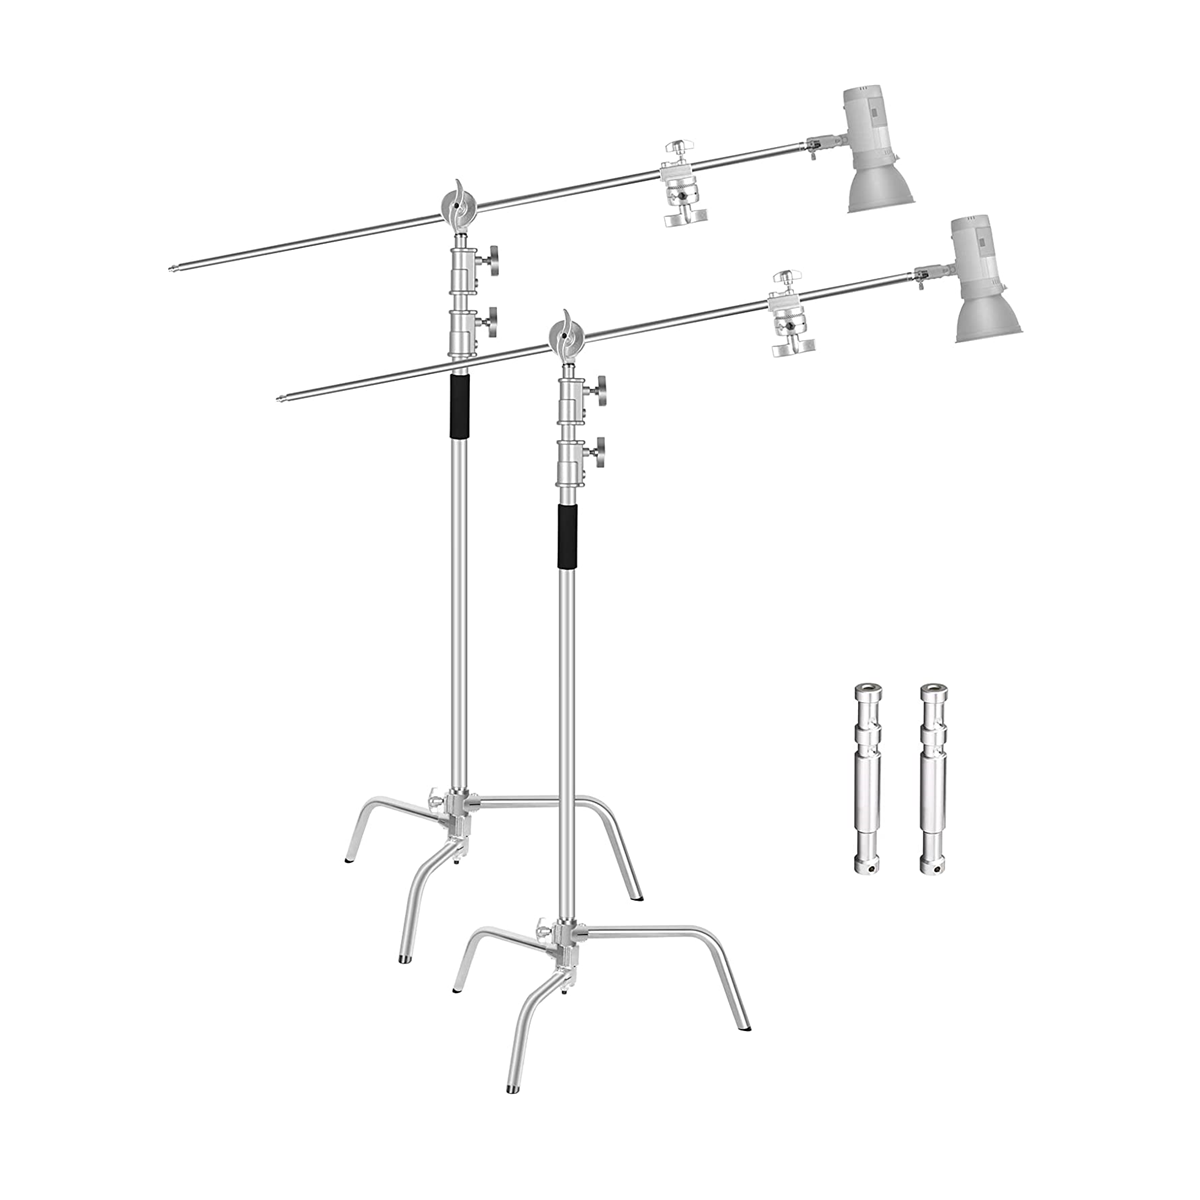 EMART 10ft/300cm Adjustable Heavy Duty Photography C Stand with 4.2ft/128cm Boom Arm - EMART INTERNATIONAL, INC (Official Website)